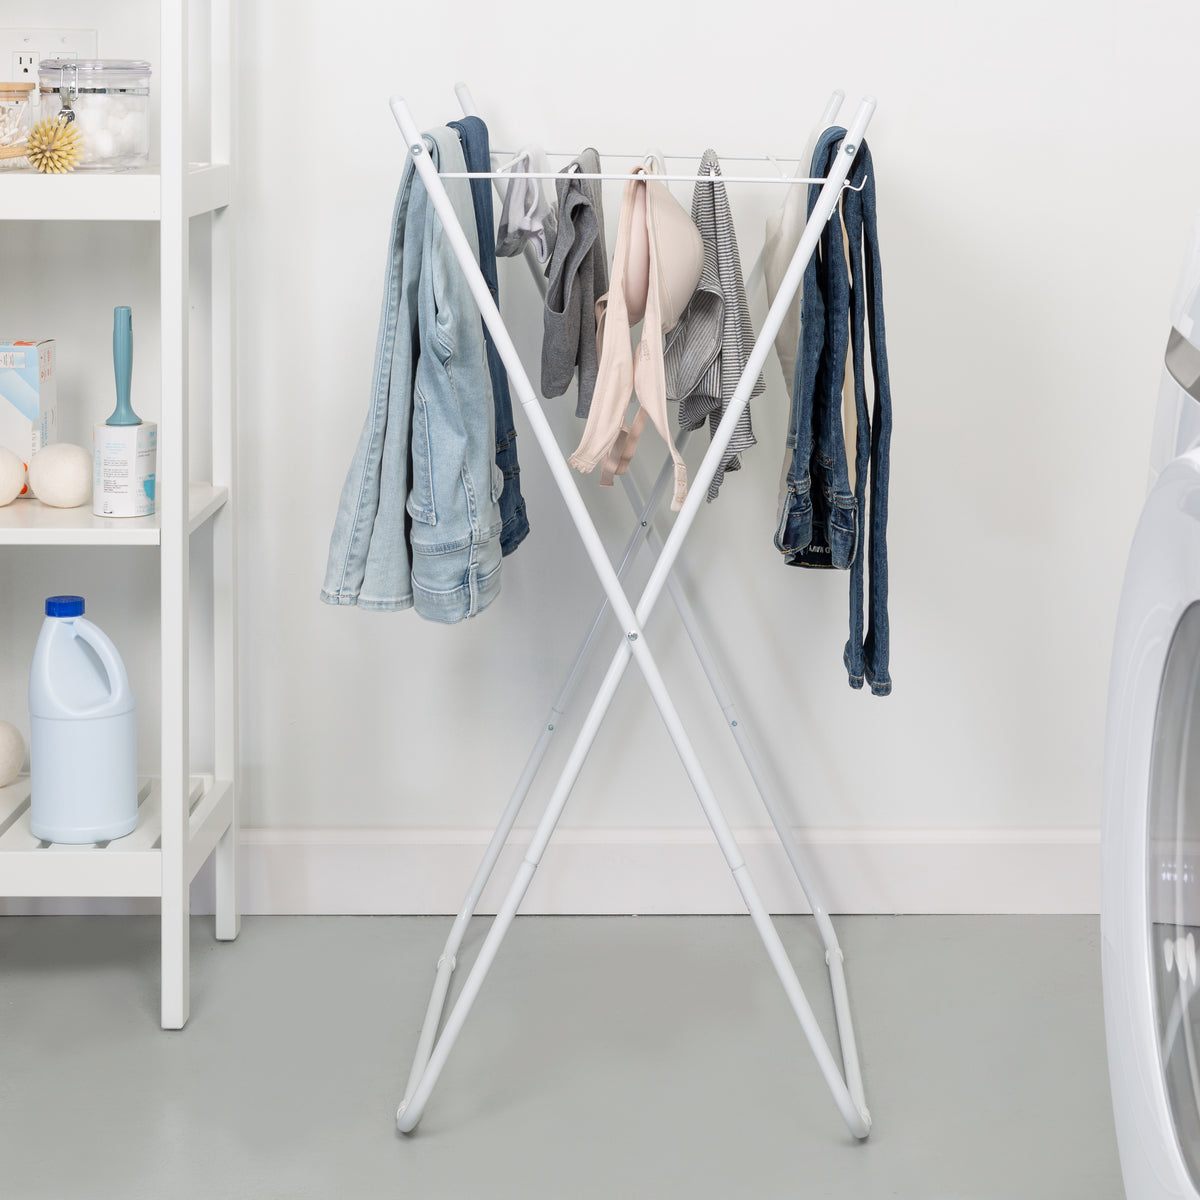 Folding Clothes Horse Dryer Hangers For Clothes Home Accessories